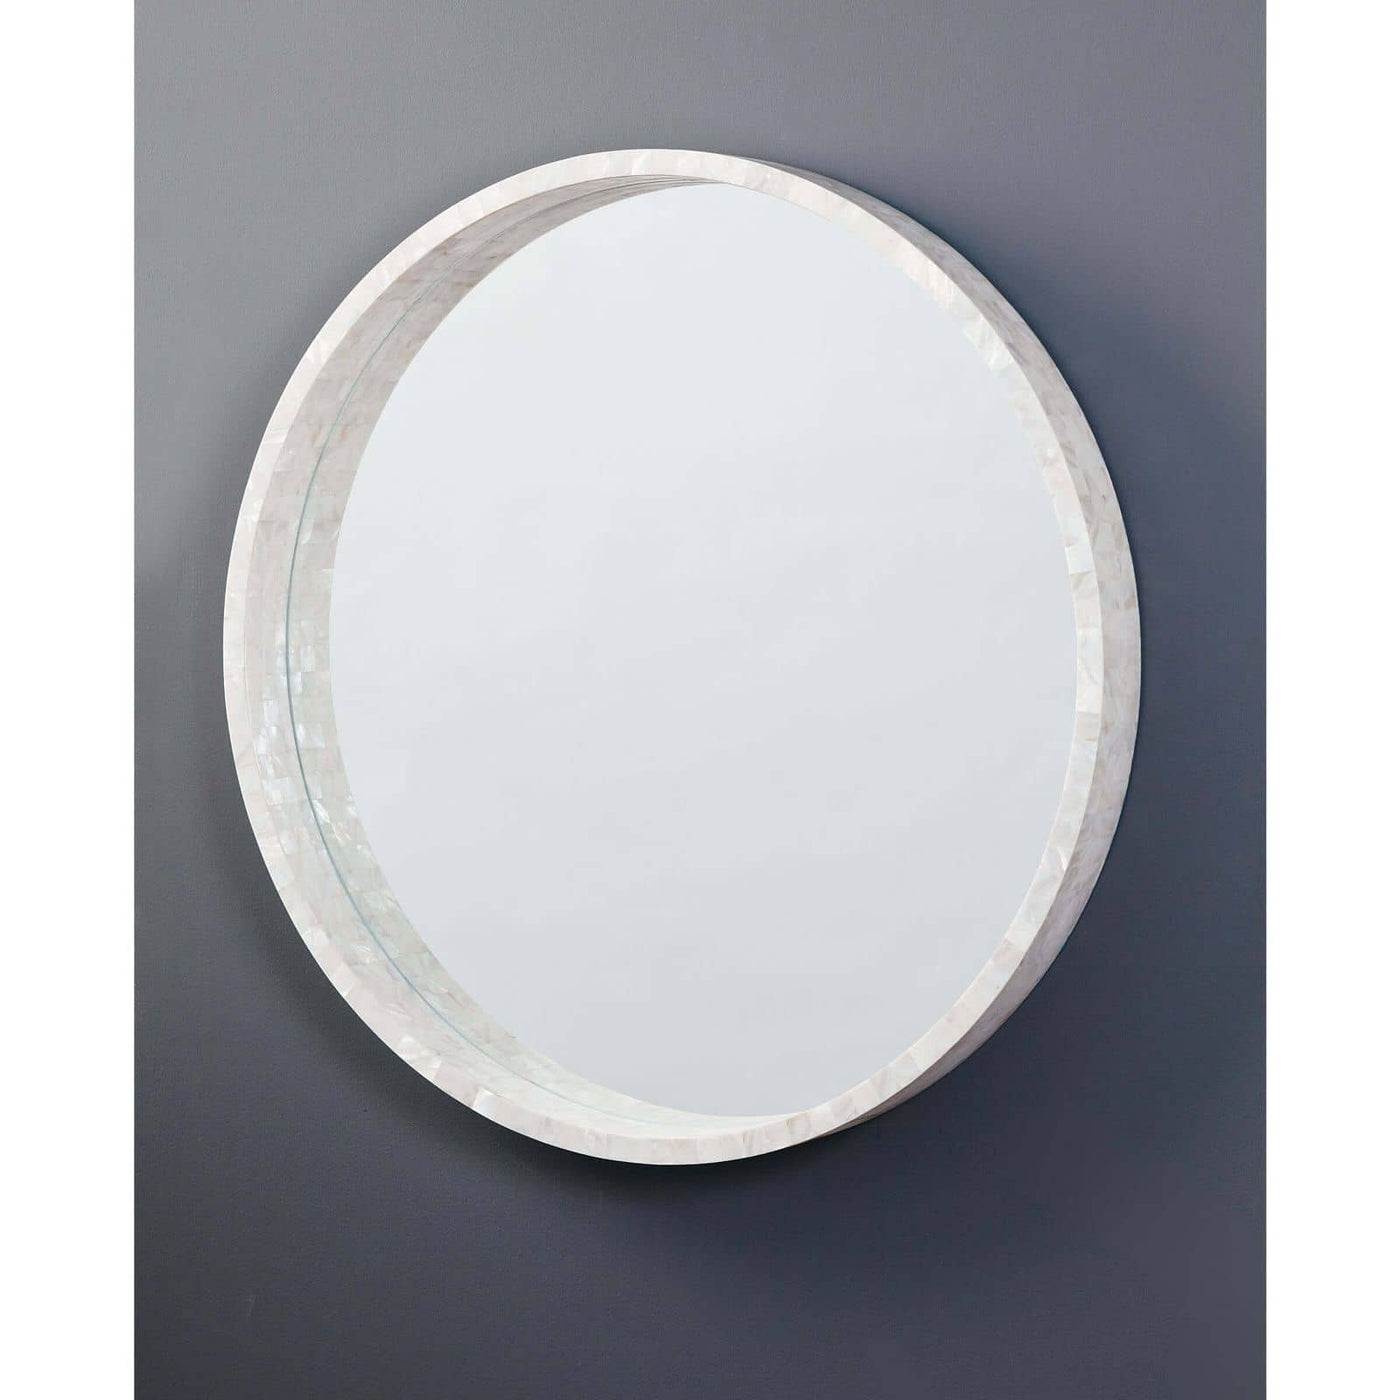 MIRROR MOTHER OF PEARL LARGE